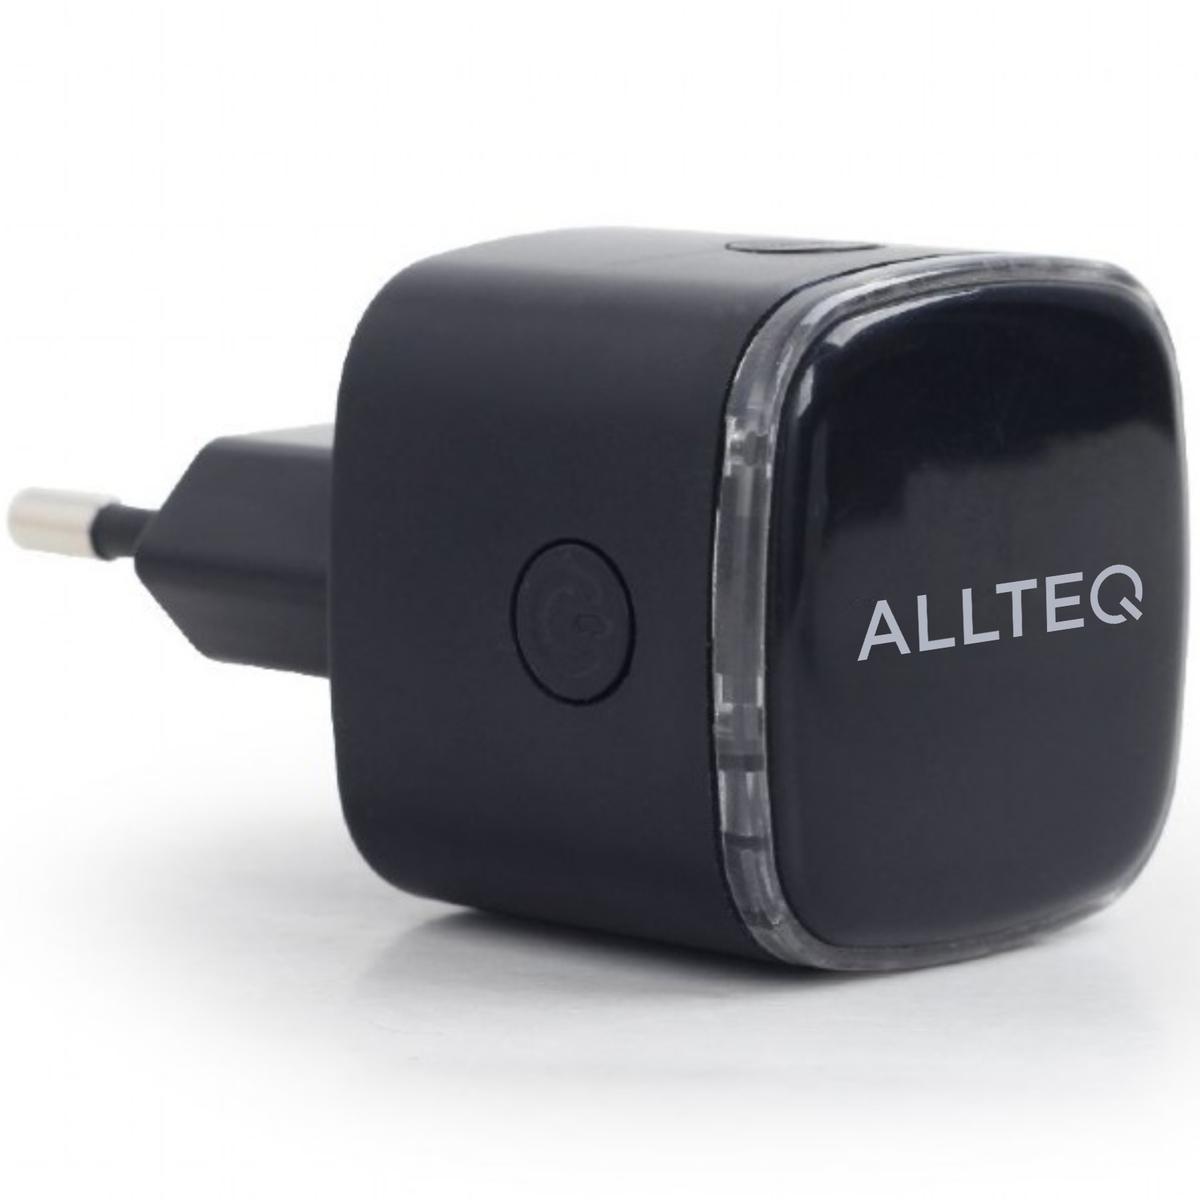 WiFi Repeater 300 Mbps - Allteq